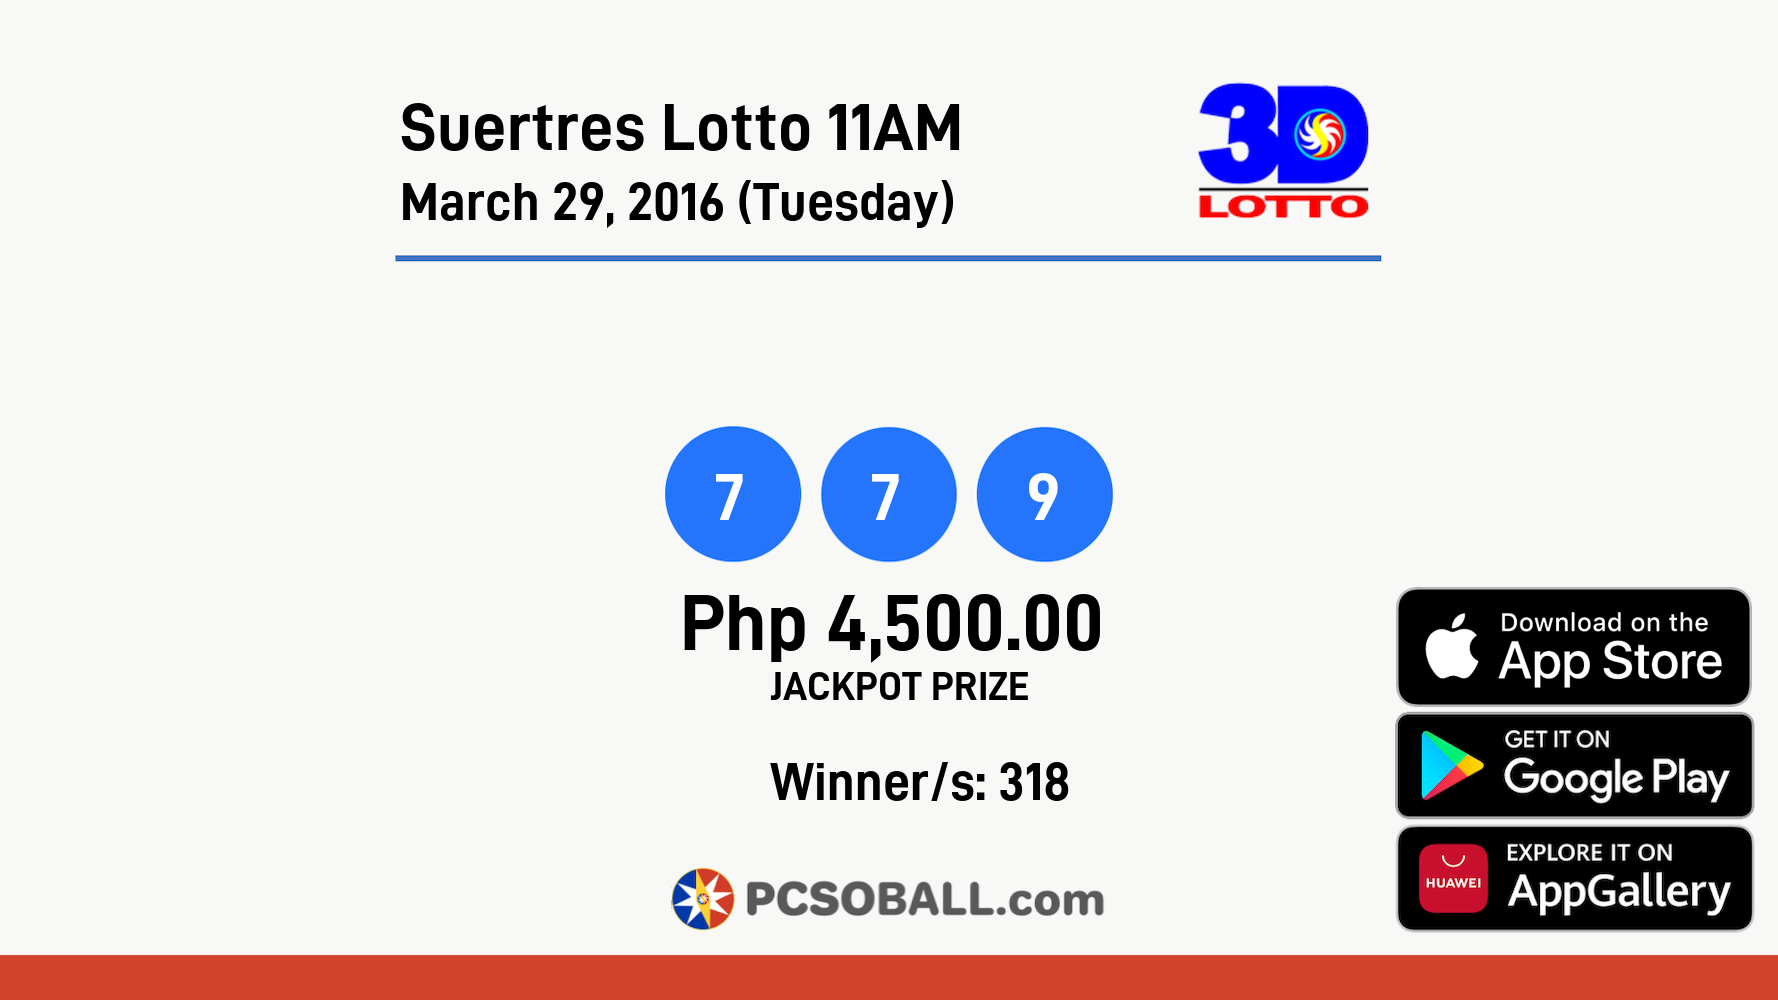 Suertres Lotto 11AM March 29, 2016 (Tuesday) Result